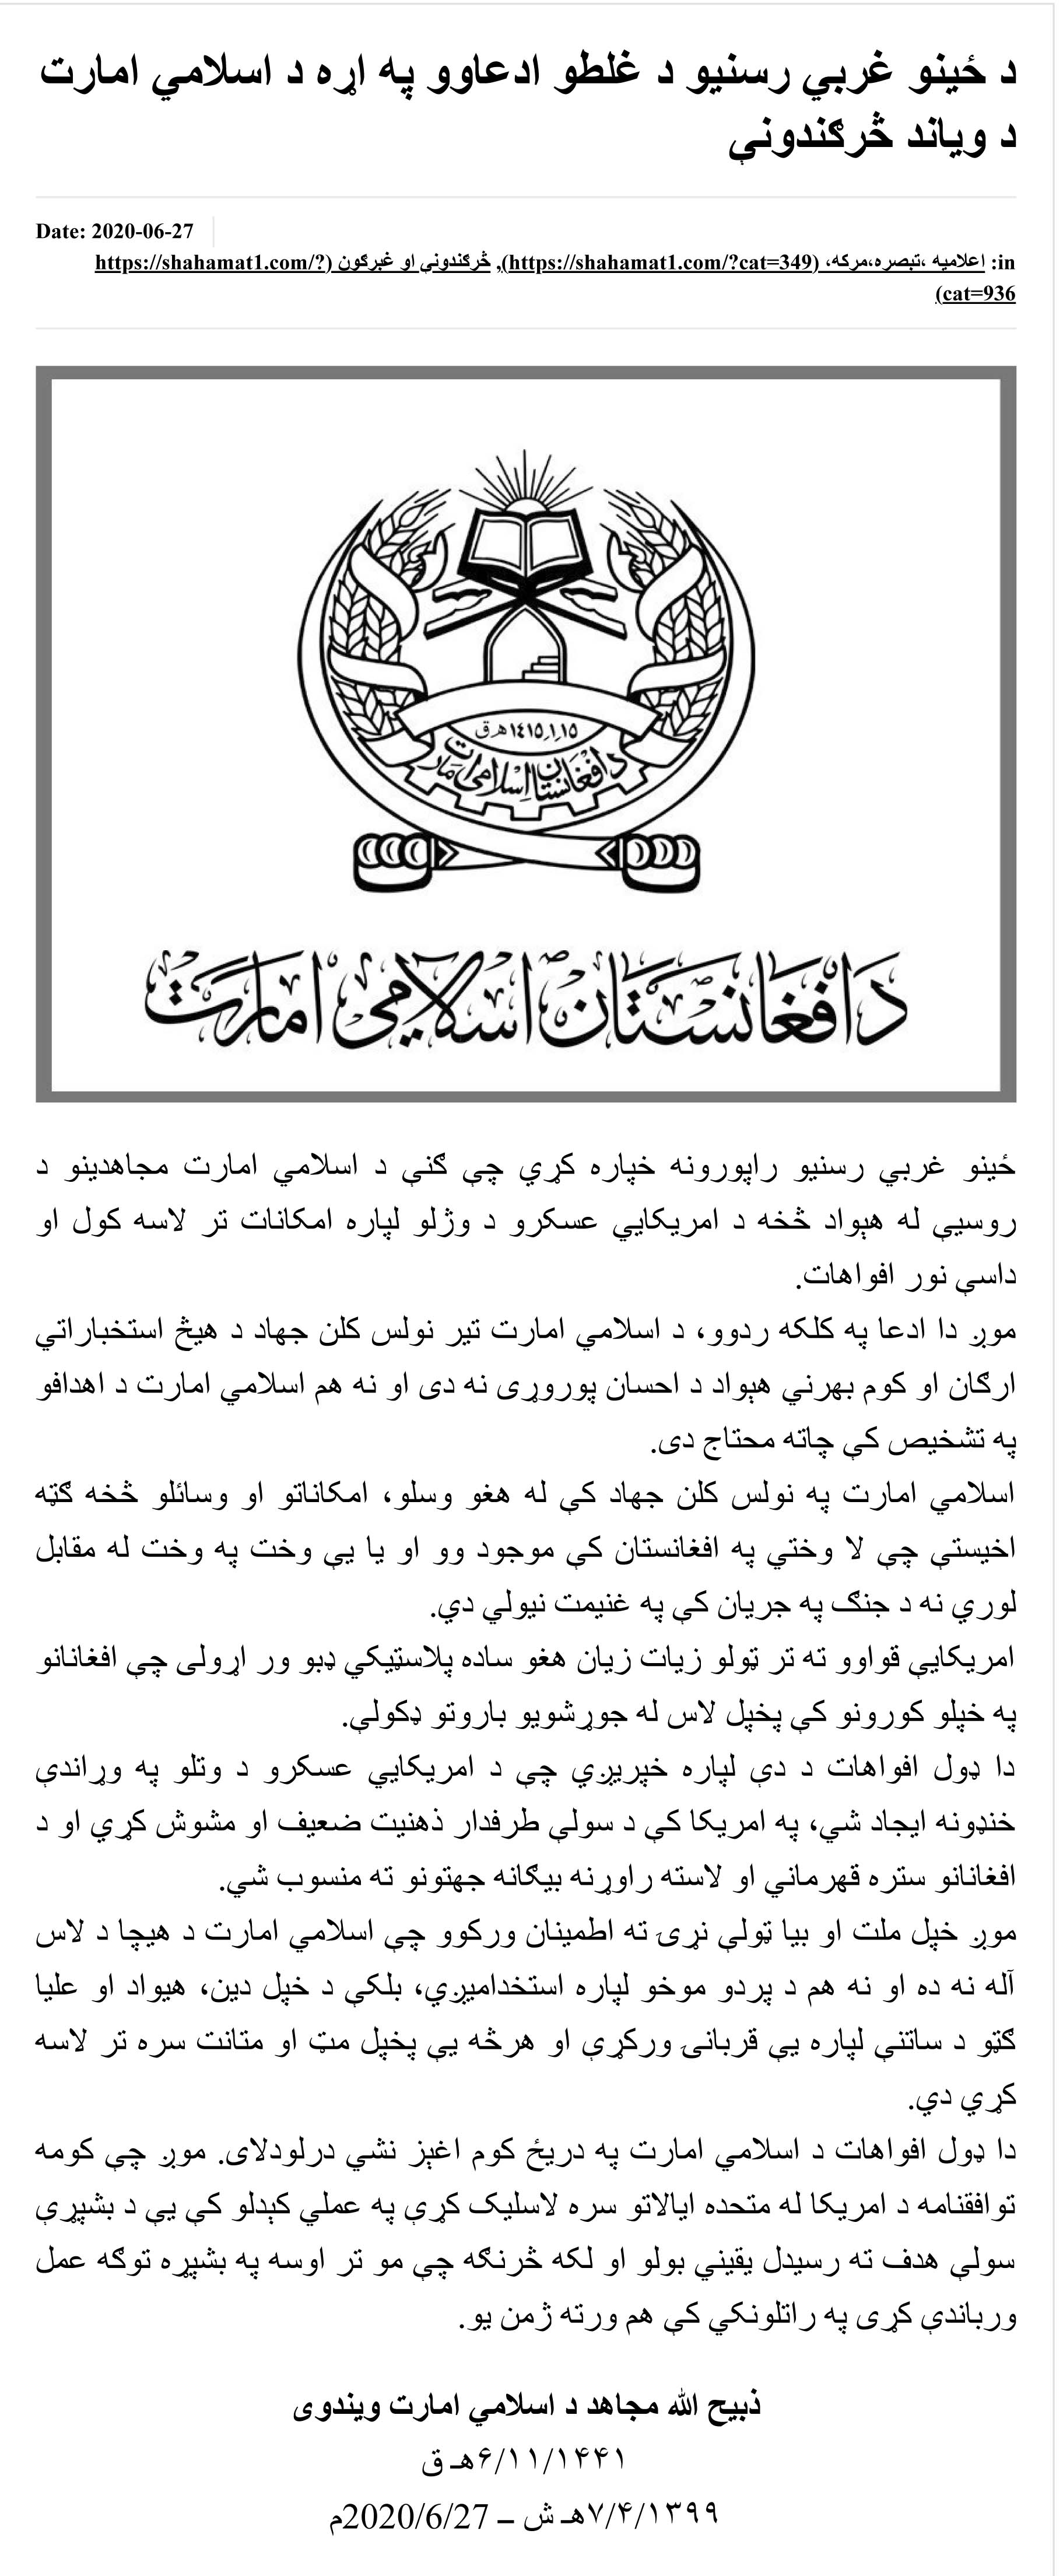 Taliban Statement on Russia Payment, June 27, 2020